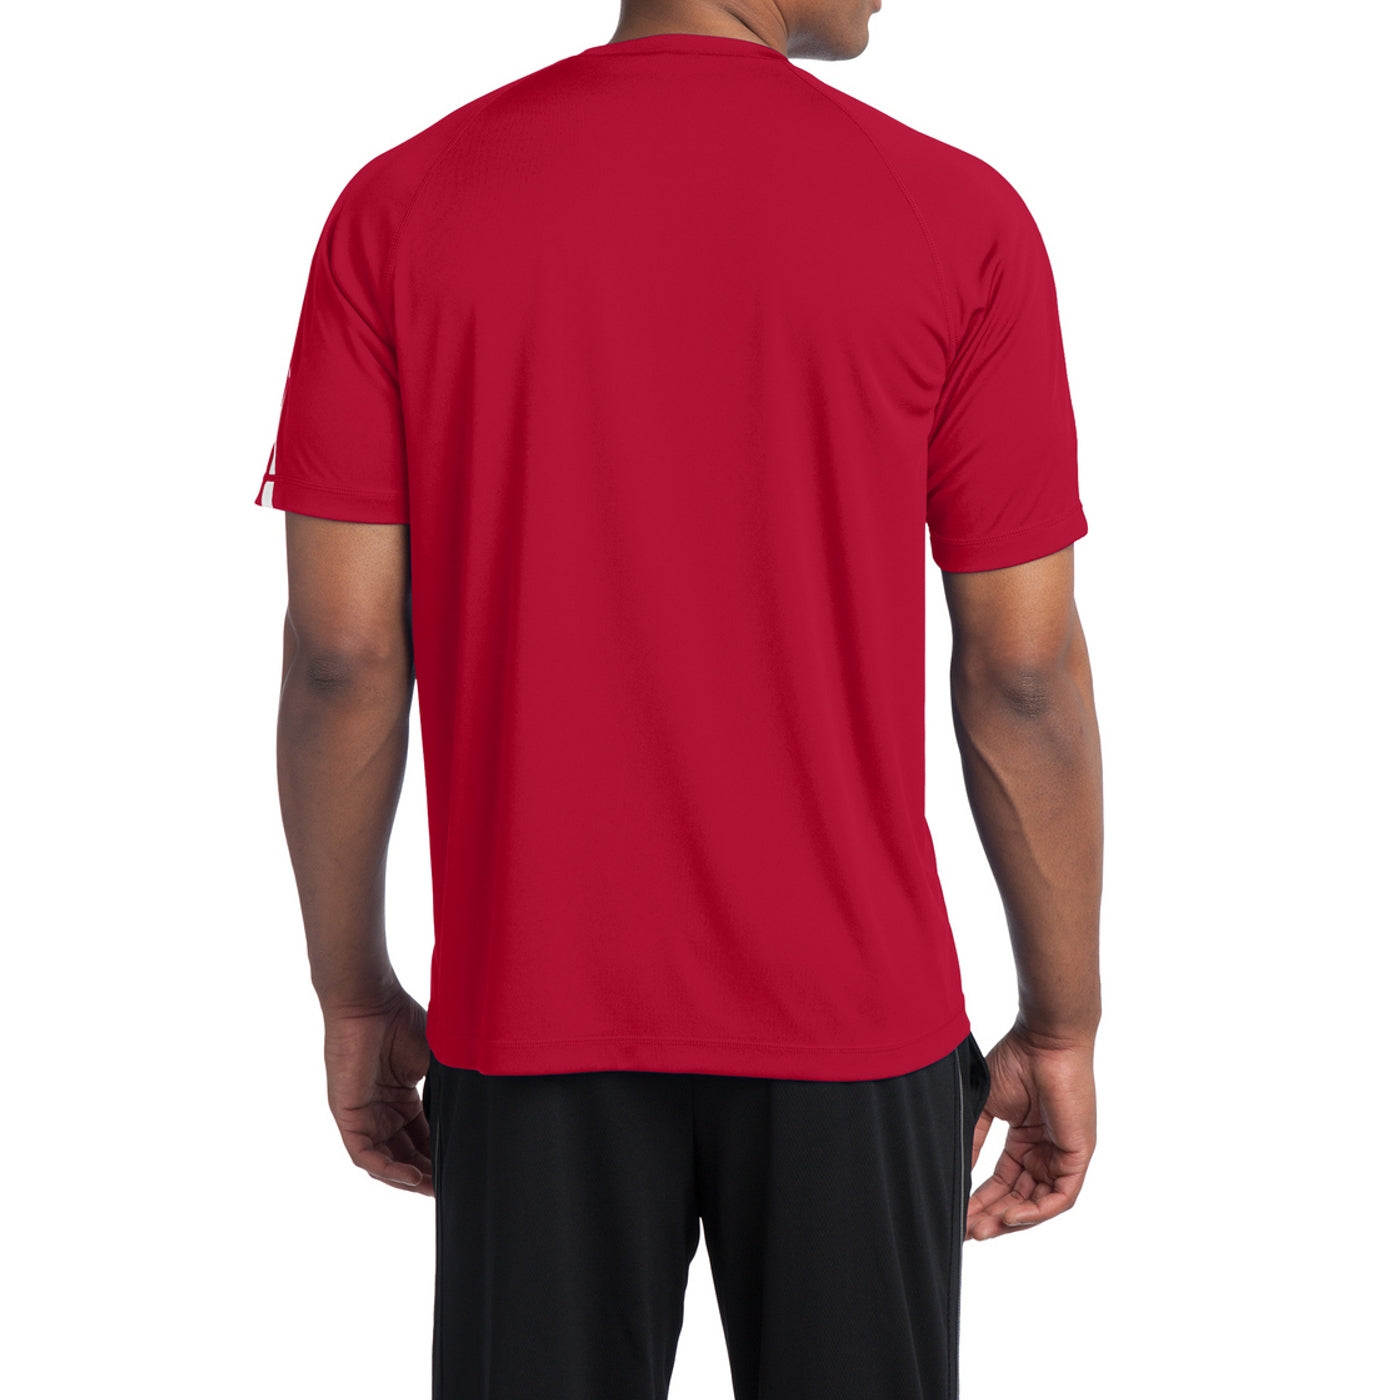 Men's Colorblock PosiCharge Competitor Tee - True Red/ White